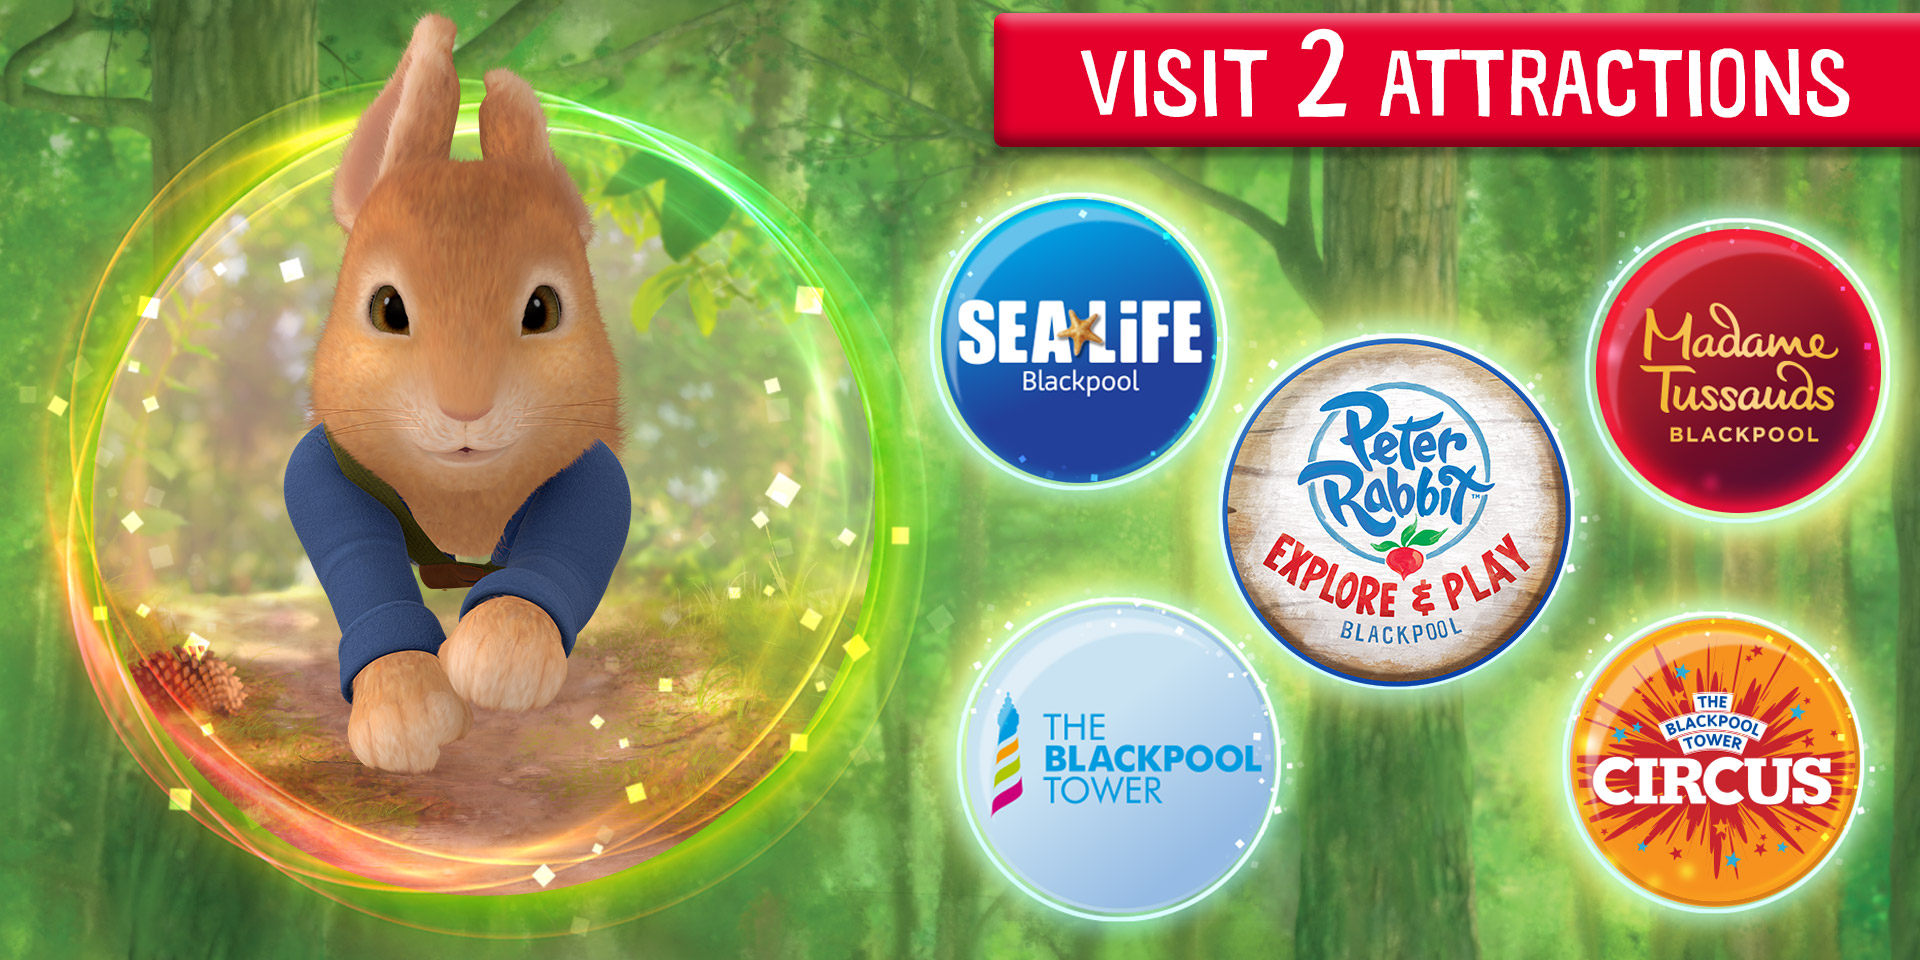 Peter Rabbit Explore and Play Blackpool plus two Blackpool Attractions